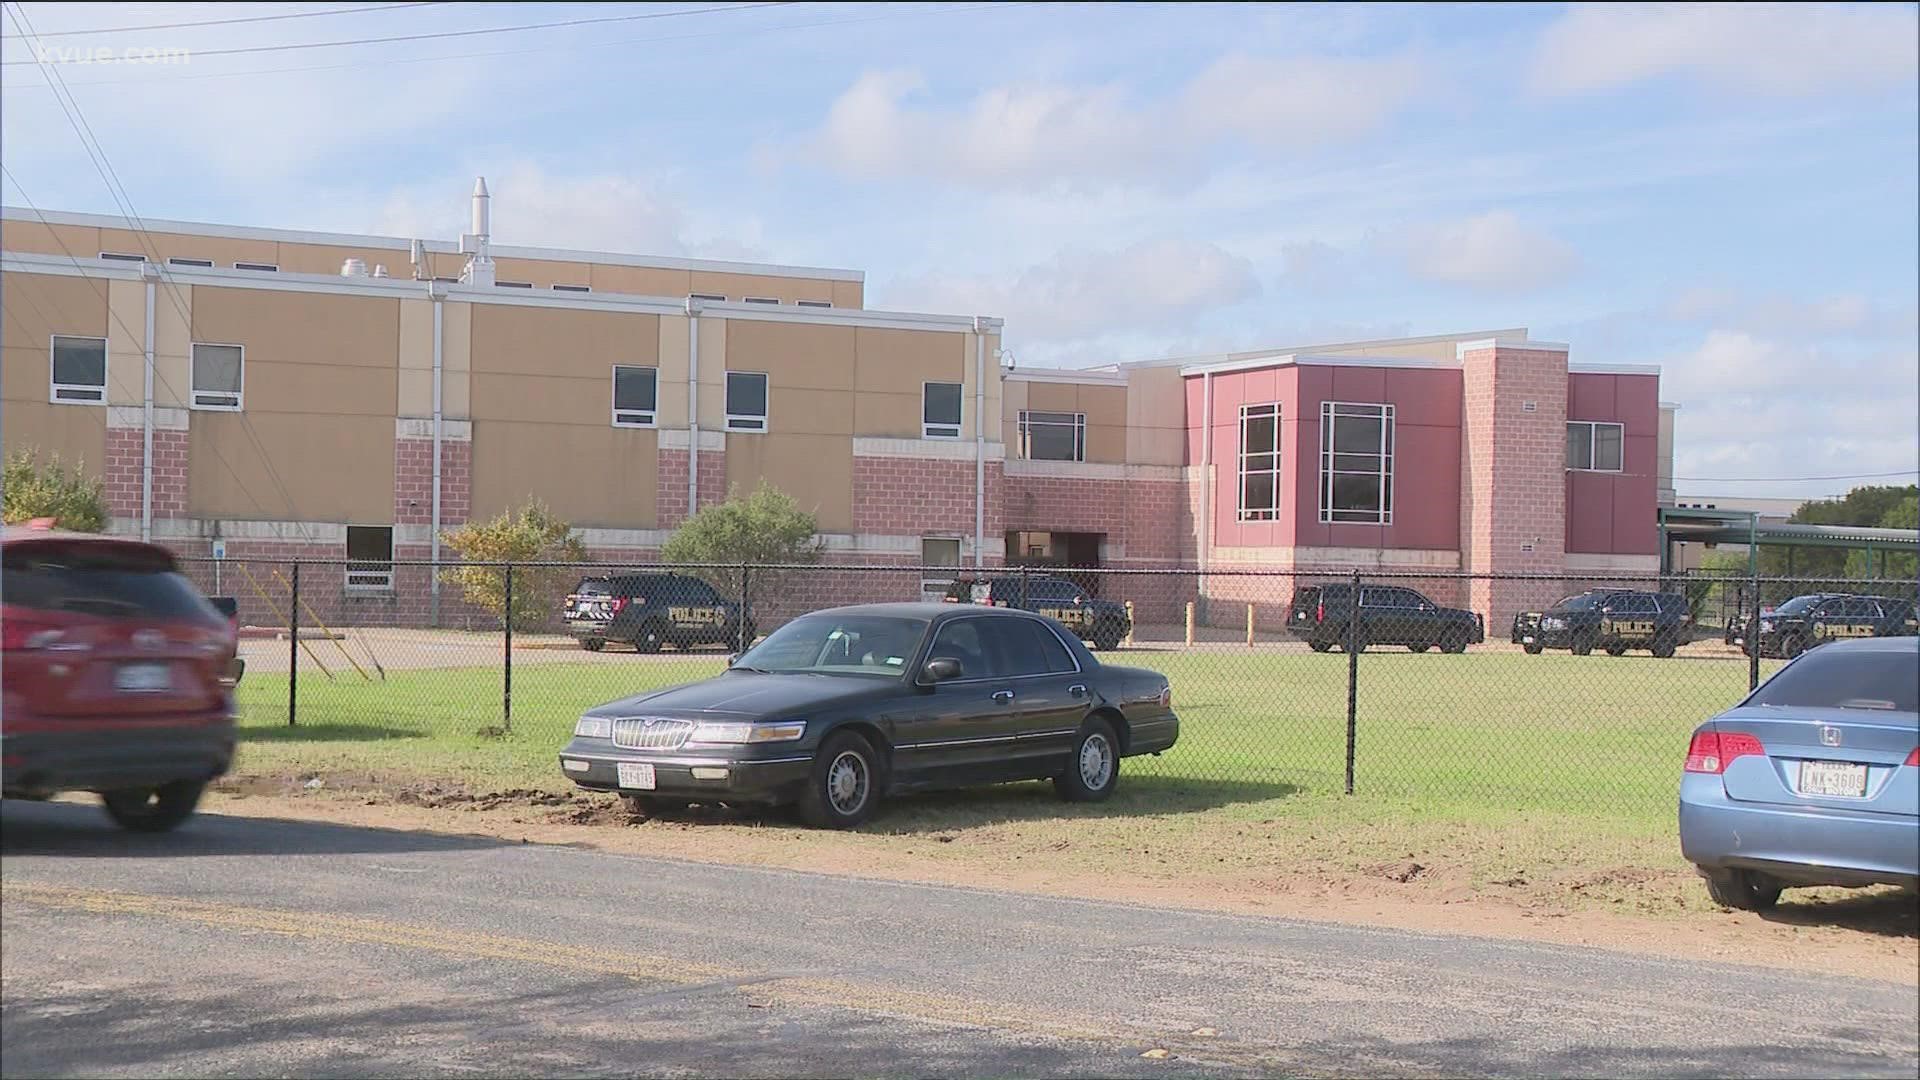 Three students have been identified and located after reports of an armed subject at Akins Early College High School.